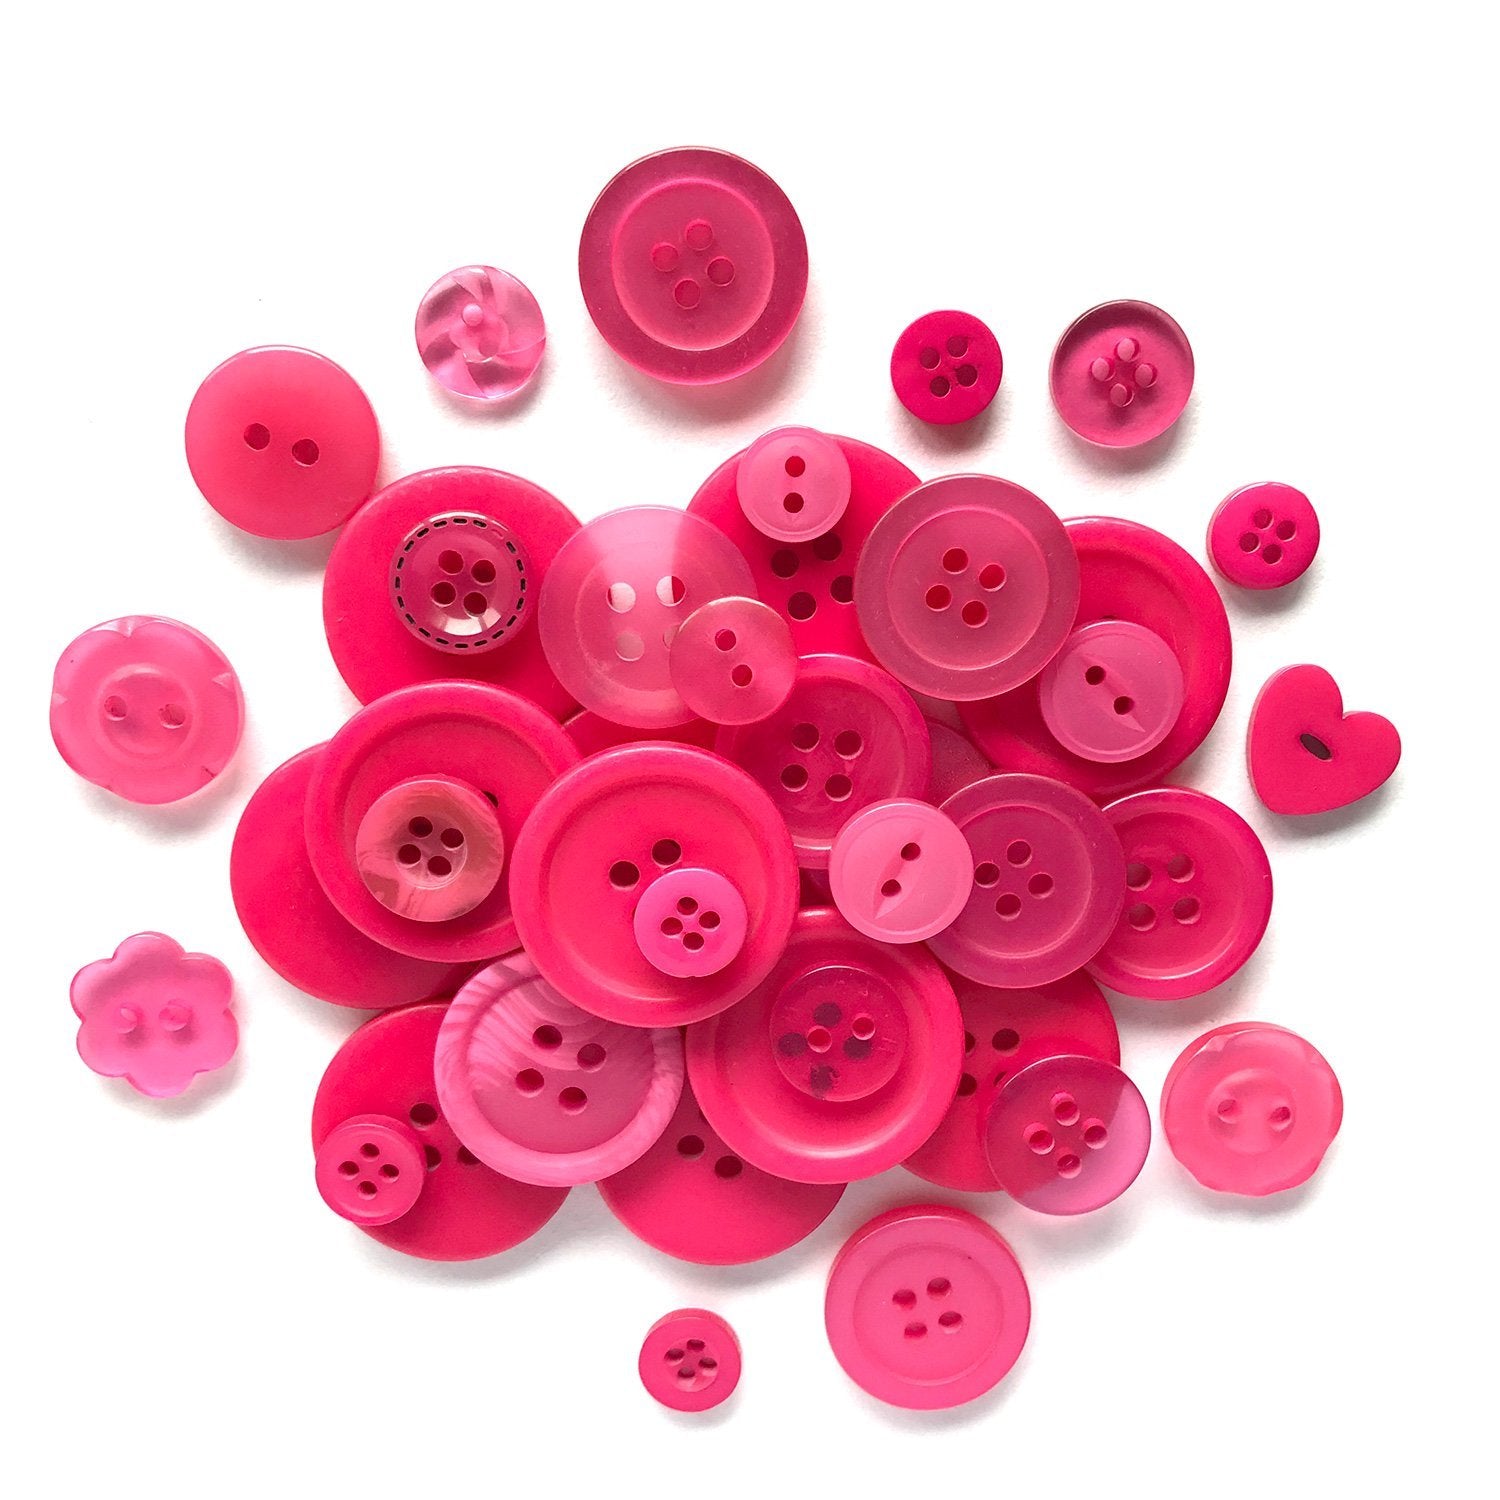 Buttons Galore Button Bonanza Bulk Buttons for Sewing & Crafts